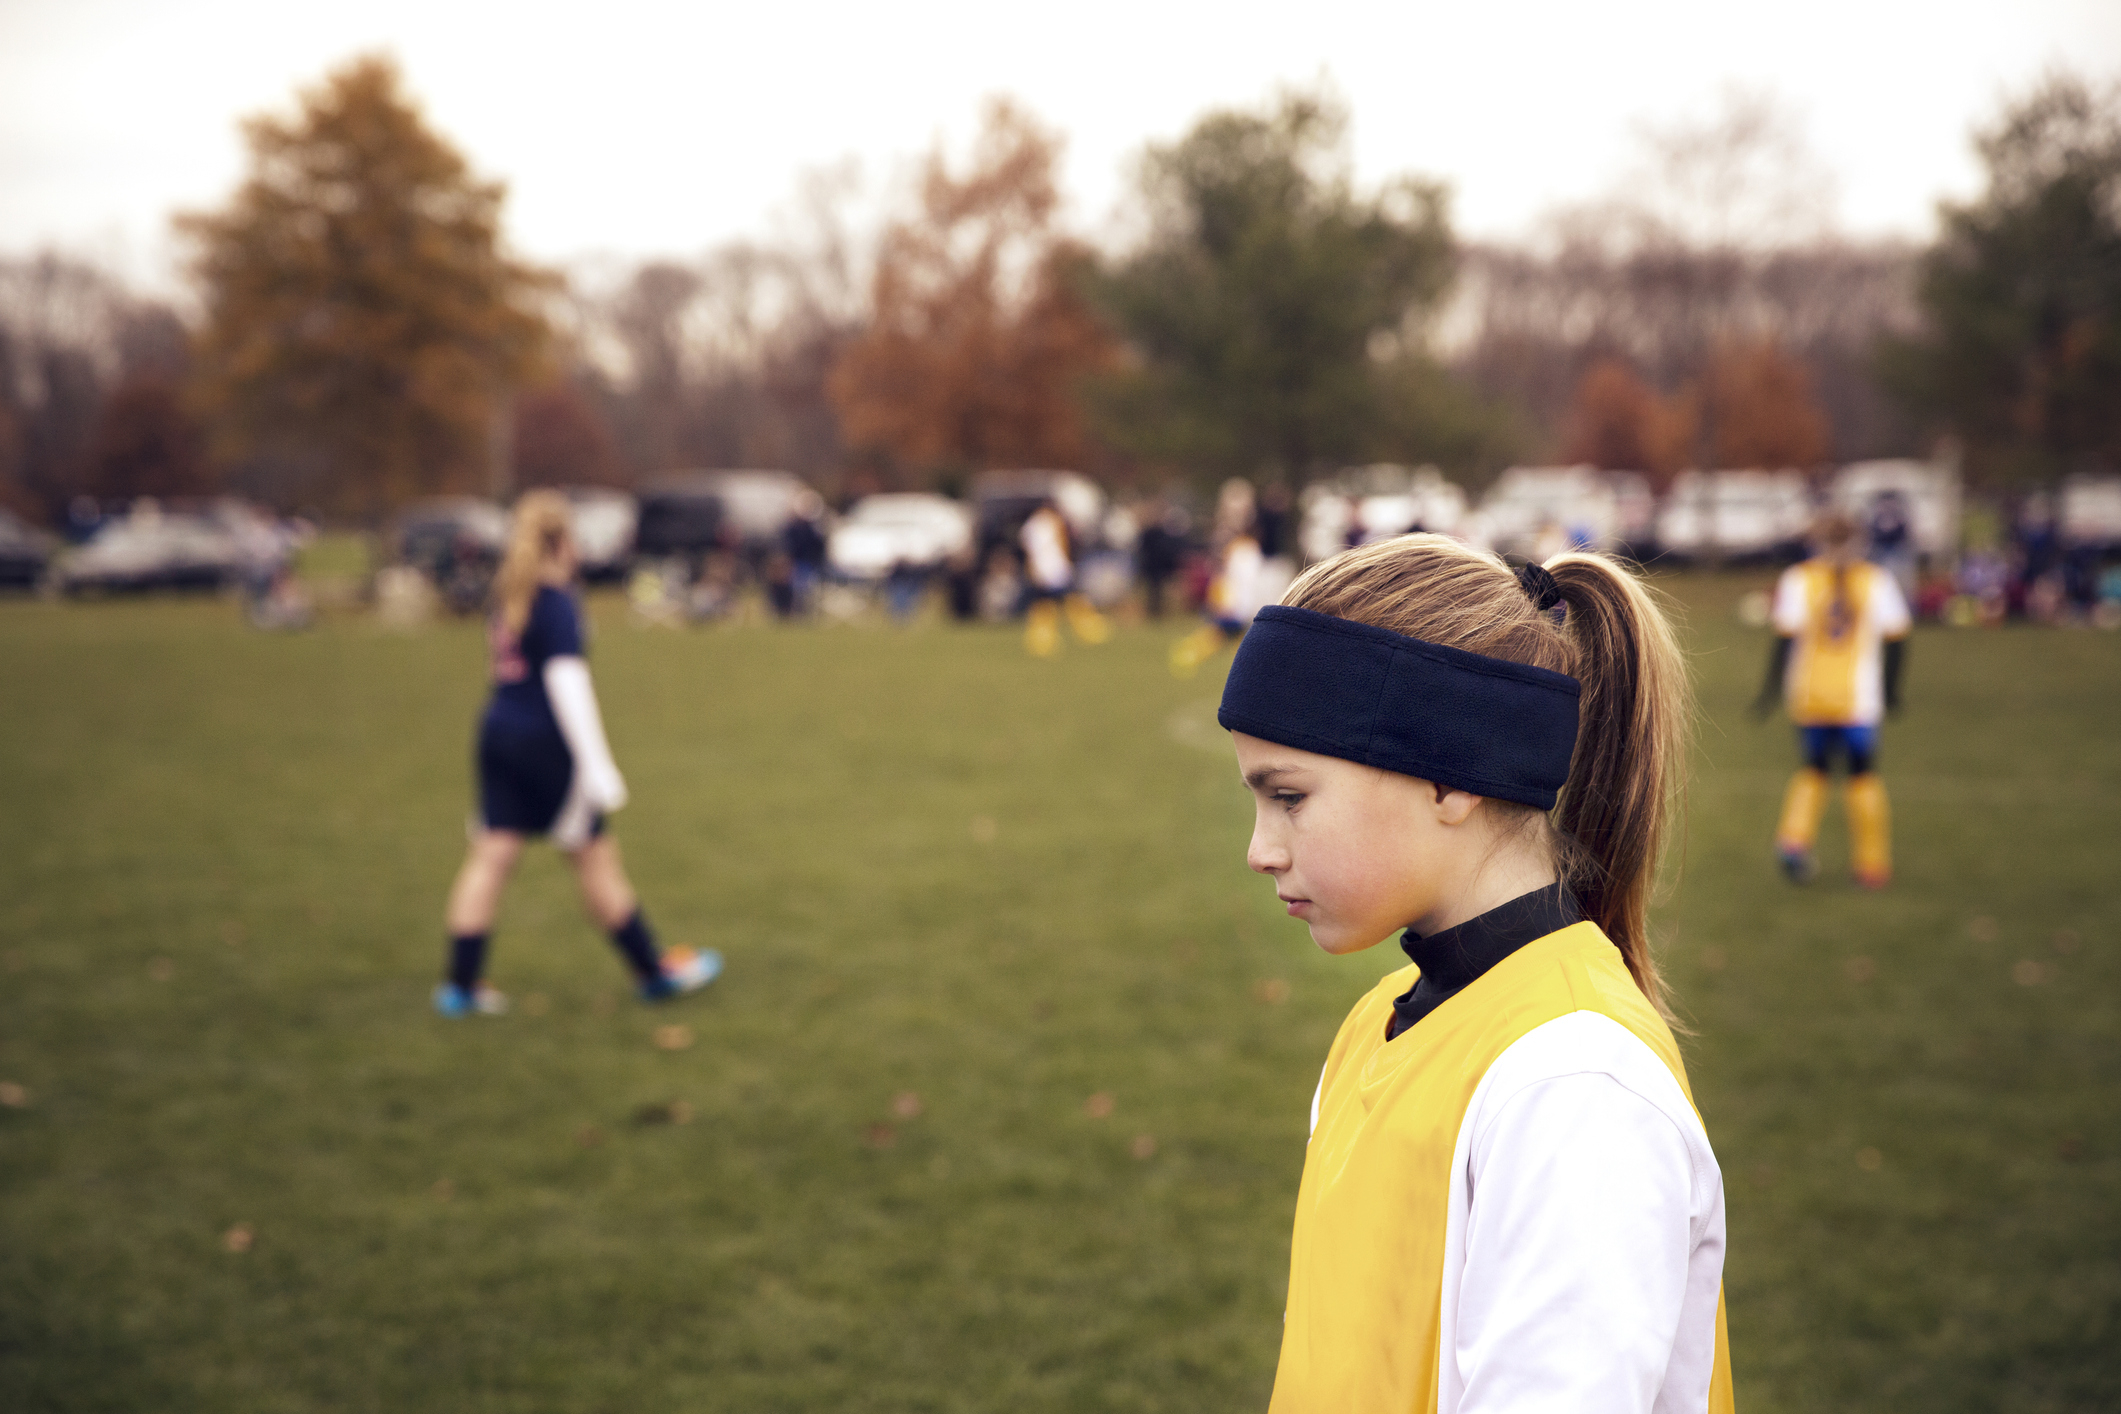 A girl is playing a soccer game